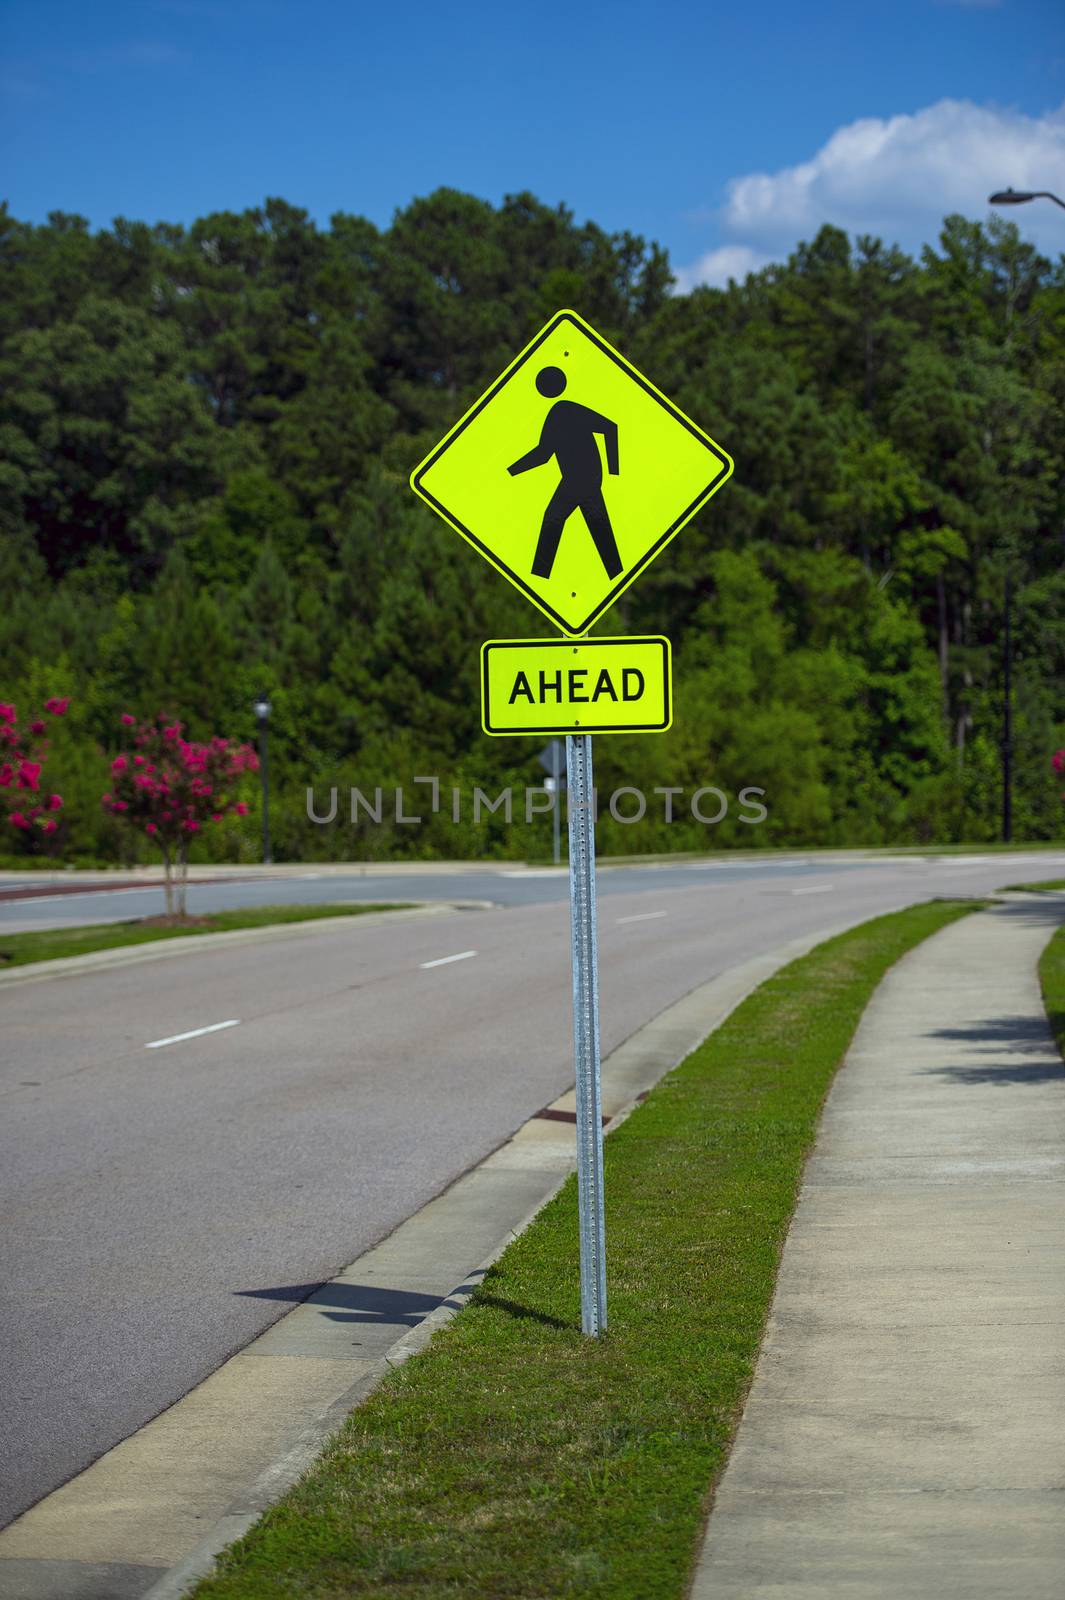 Pedestrian sign in a sunny day at a local road